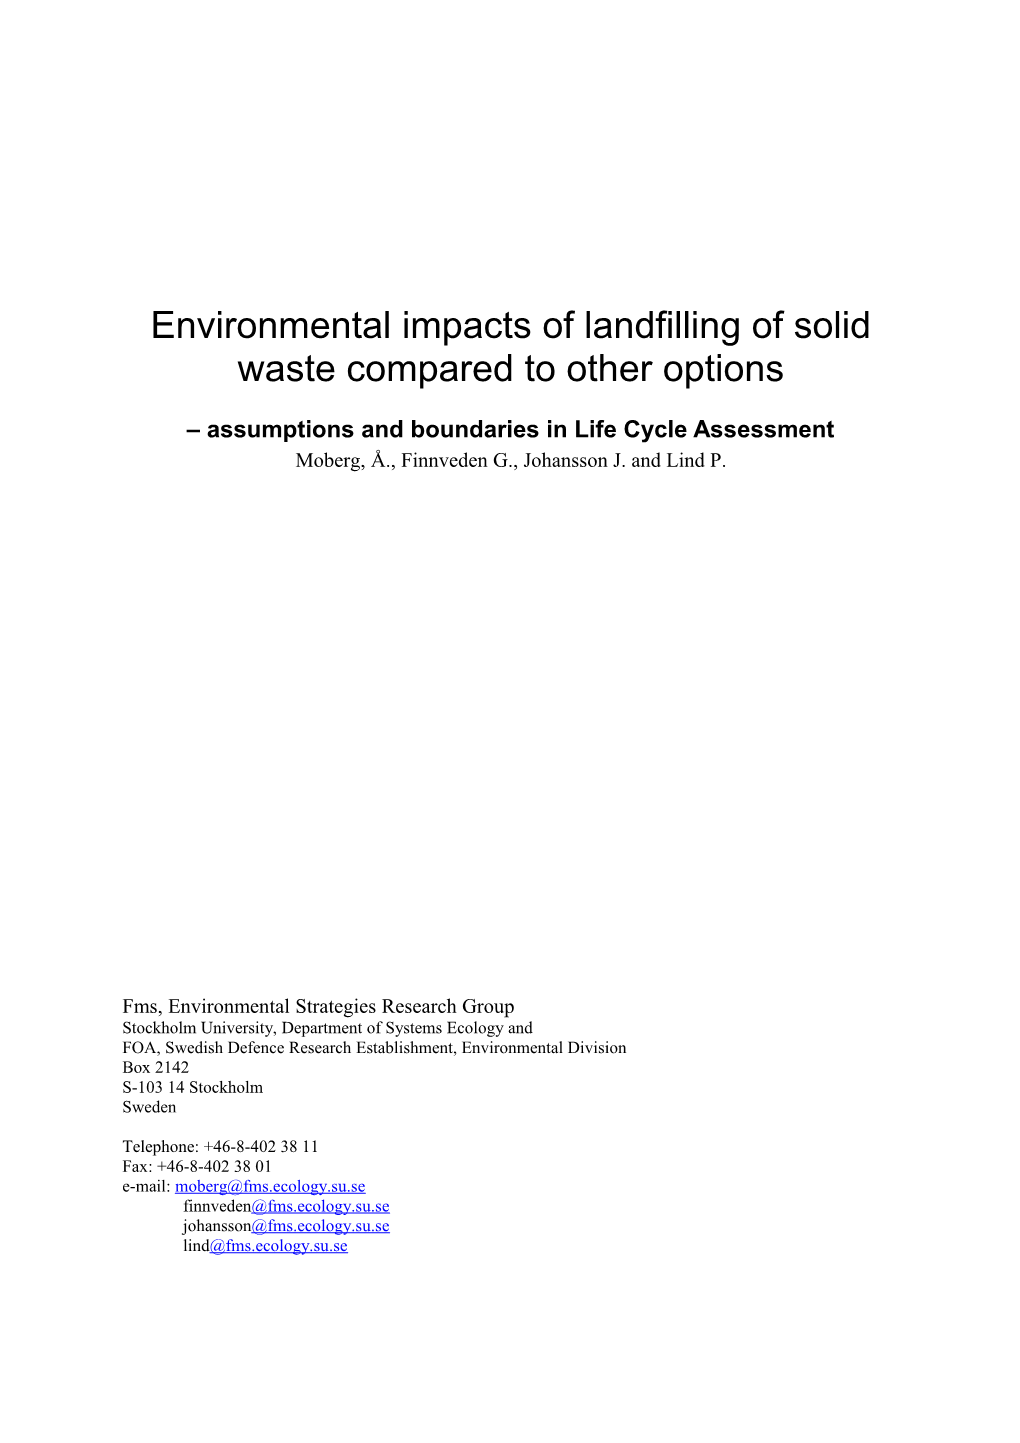 Environmental Effects of Landfilling of Solid Waste Compared to Other Options Assumptions